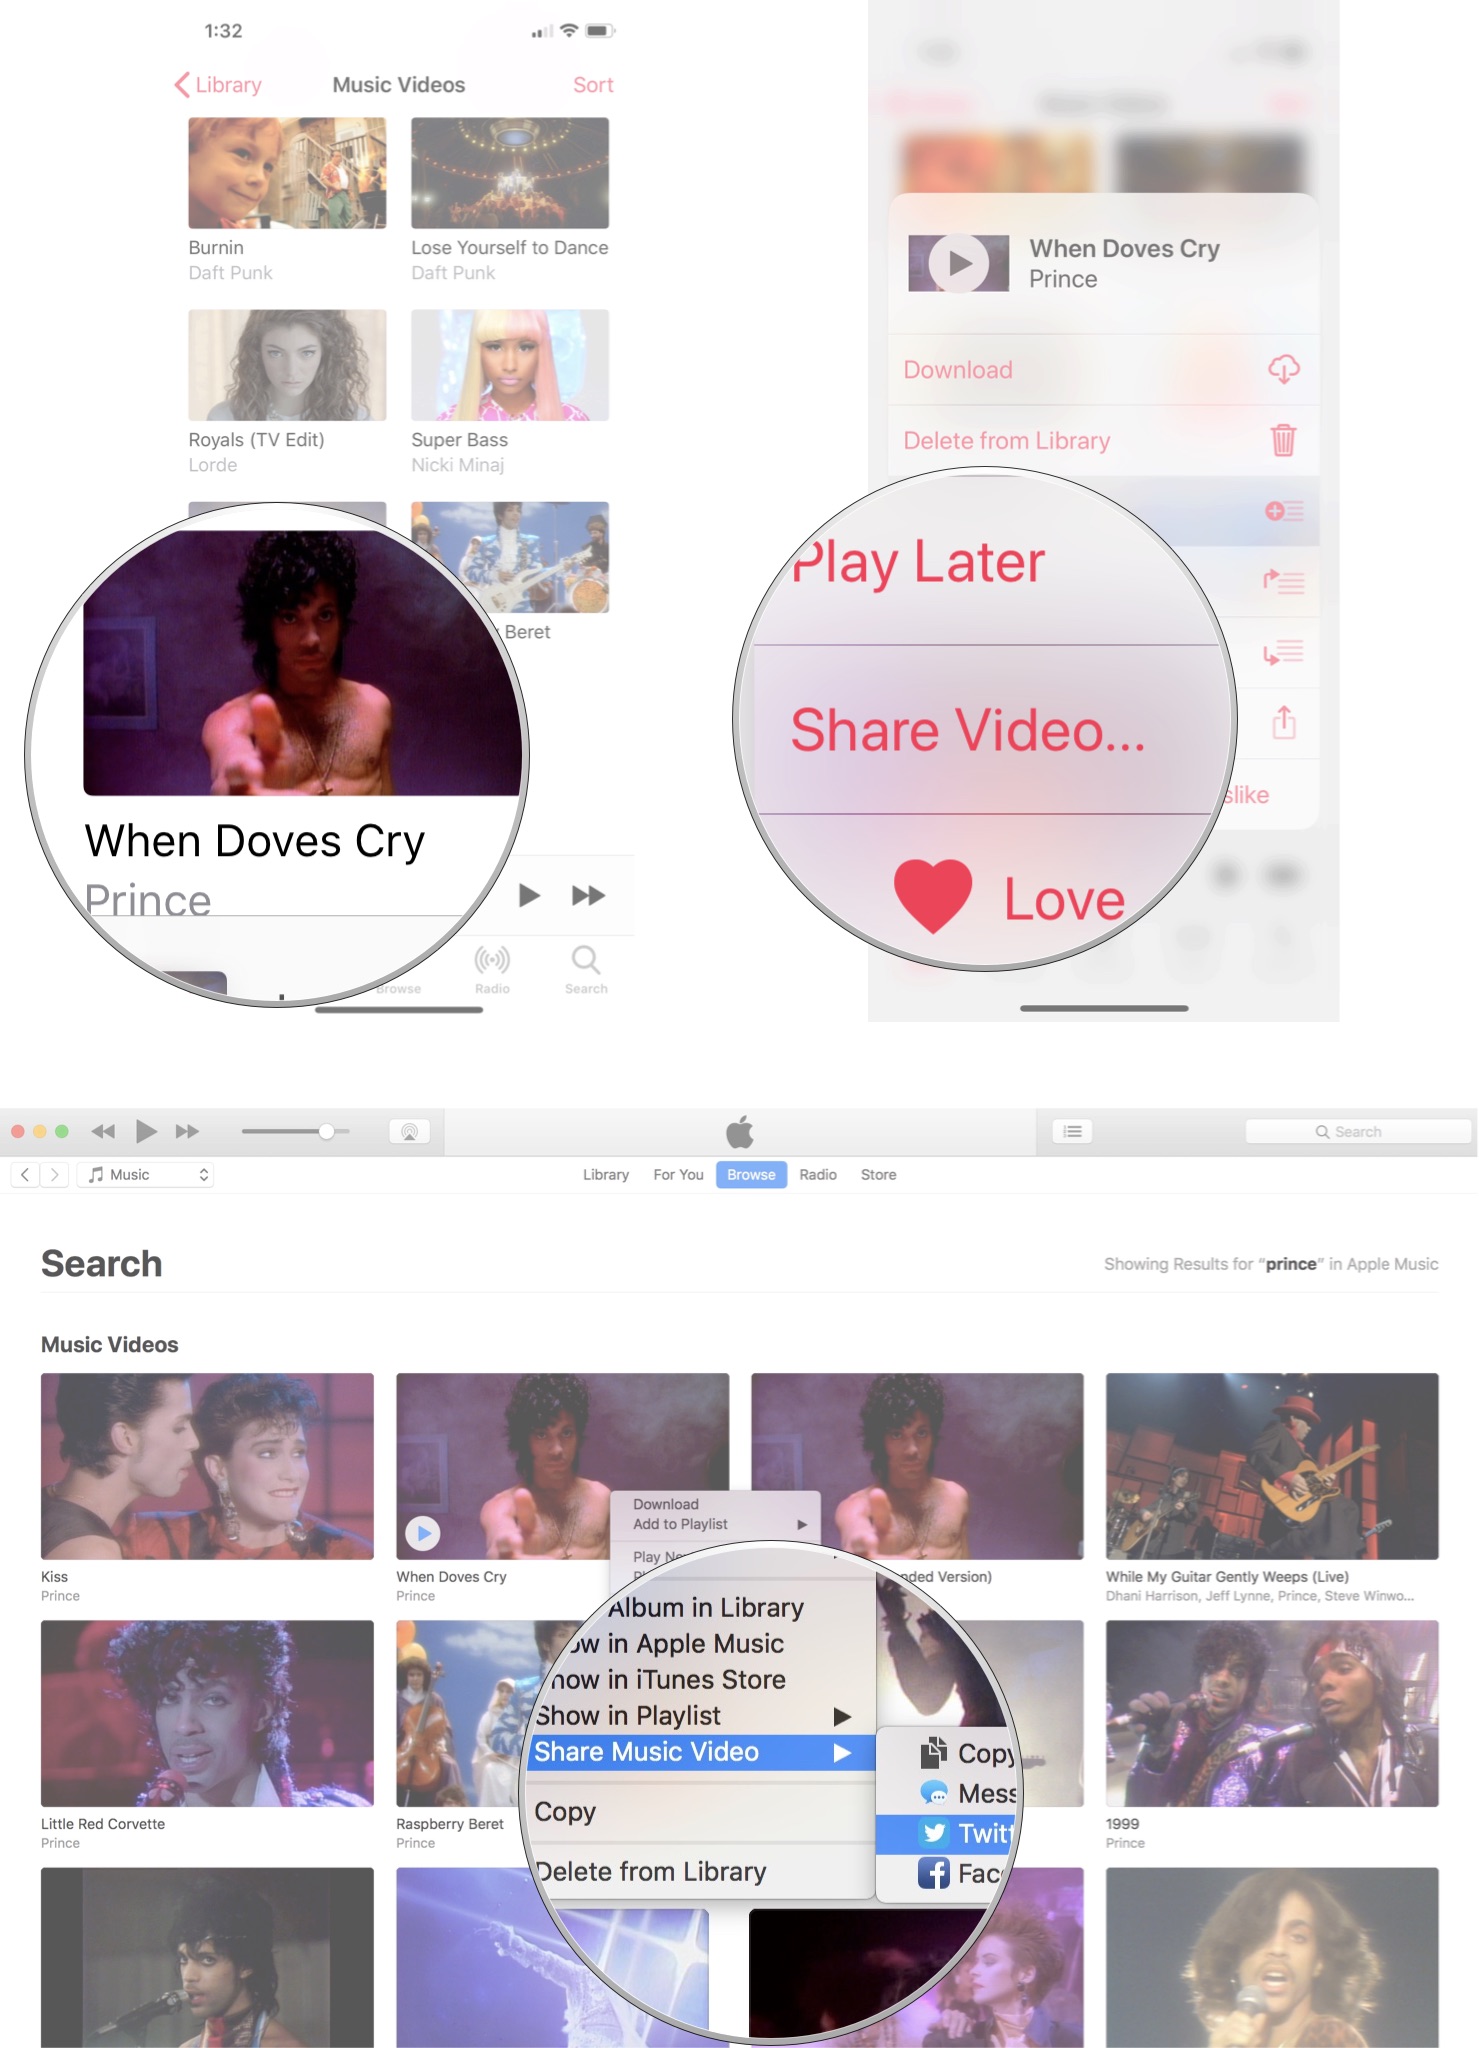 Share video in Apple Music: Control-click, Force or long press on the video, then select Share